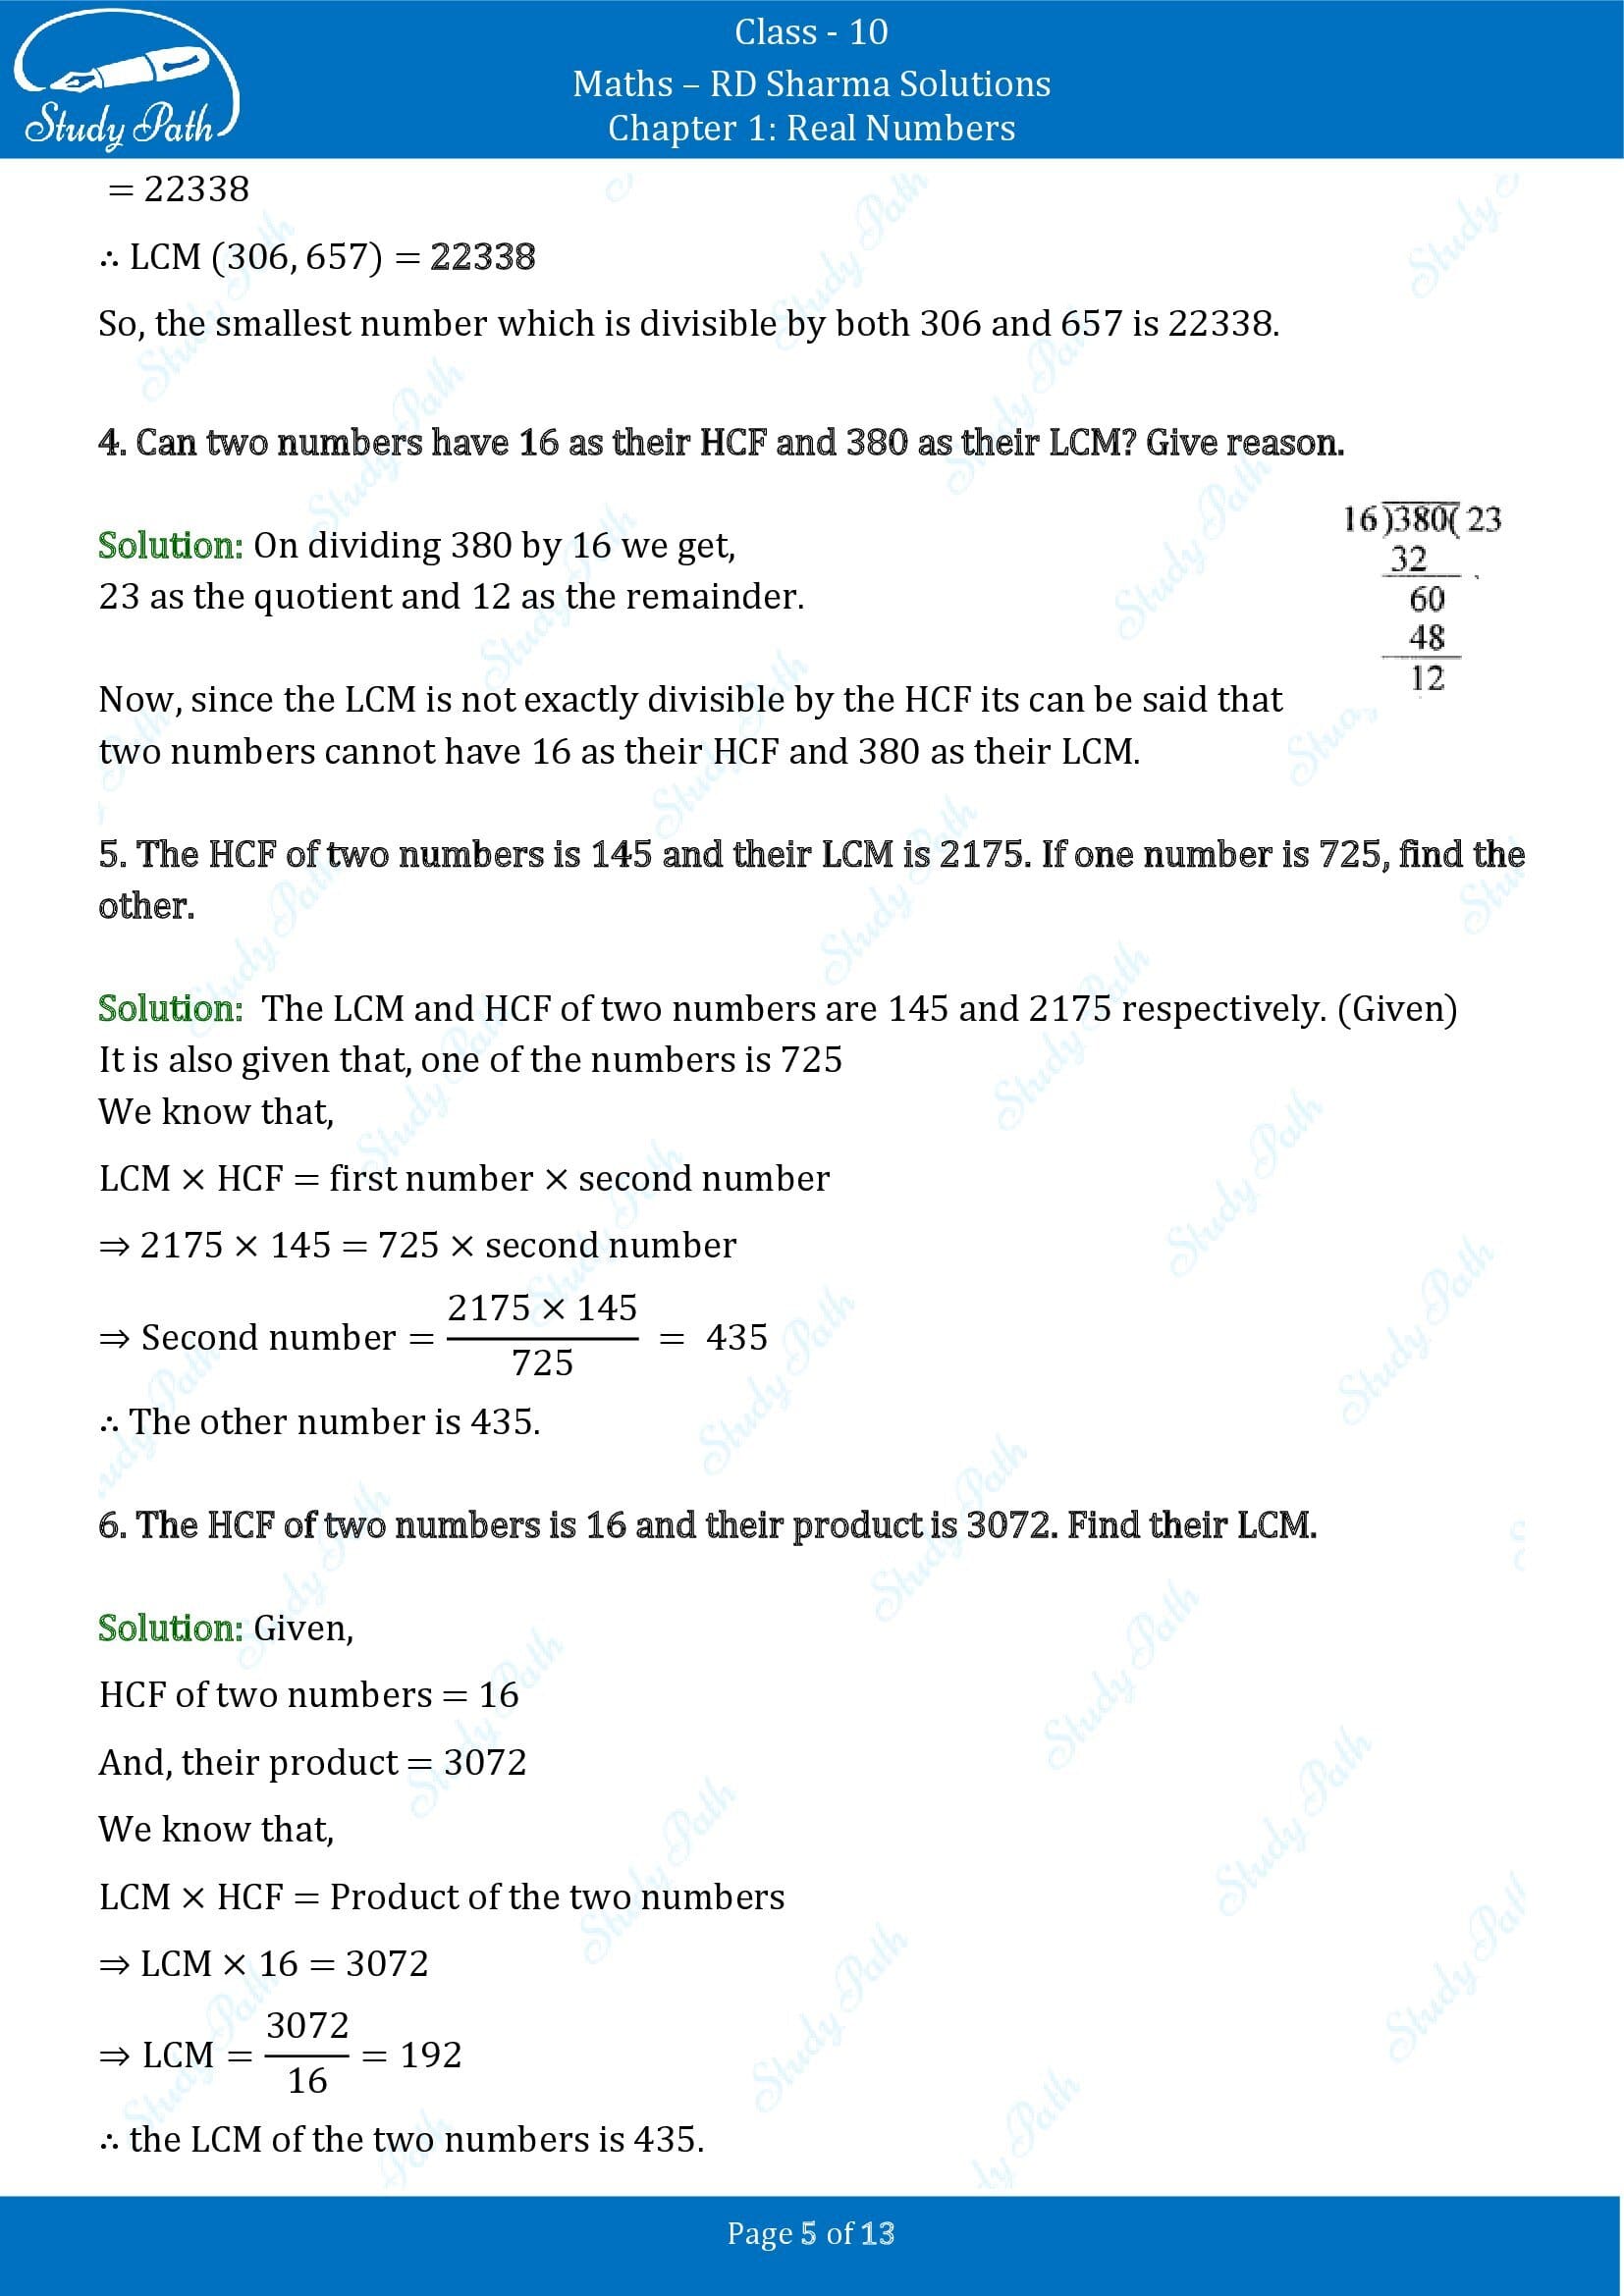 RD Sharma Solutions Class 10 Chapter 1 Real Numbers Exercise 1.4 00005